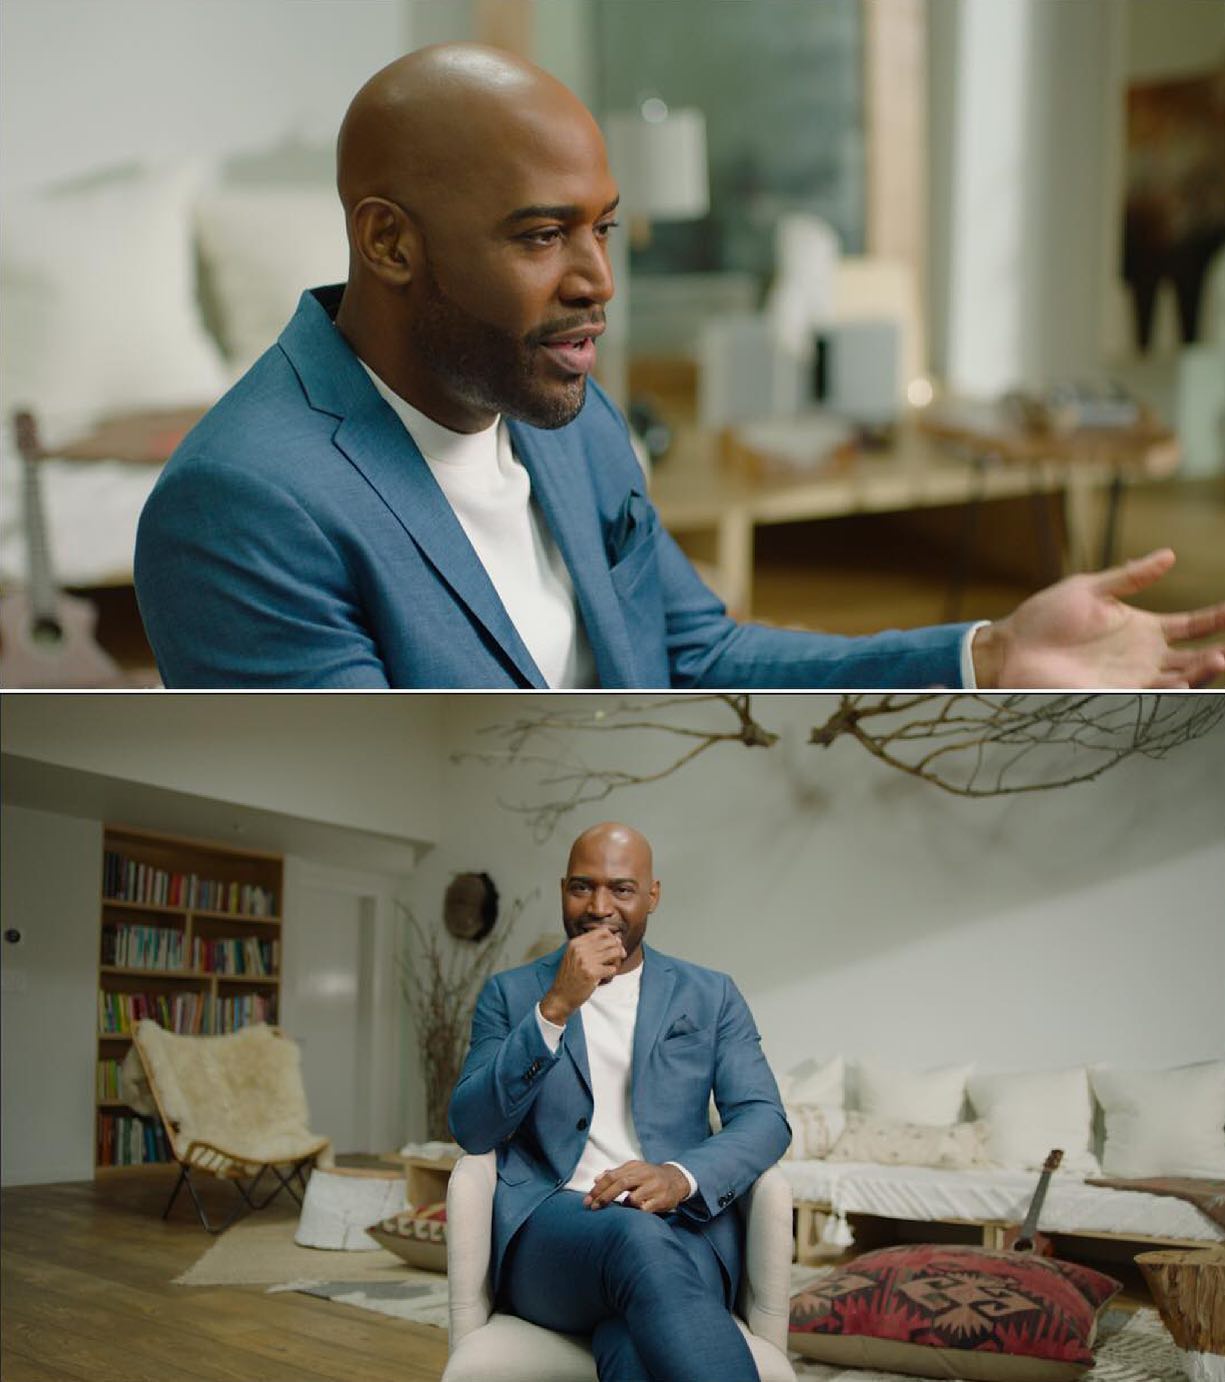 ⚡️Check out these video stills of the project we completed with Linktree x Queer Eye's Karamo for the Passion Fund! Full Videos Coming Soon!
.
.
Production company: @tigerhousefilms
Agency: Bolster 
.
.
Talent: @karamo 
.
#adagency #marketing #advertising #digitalmarketing #branding #advertisingagency #agencylife #adagencylife #creative #copywriting #artdirector #copywriter #socialmediamarketing #business #creativedirector #creativeagency #contentmarketing #advertisinglife #marketingagency #digitalagency #socialmedia #fun #productioncompany #storyboards #productionlife #karamo #queereye #linktree #commercial #bhfyp